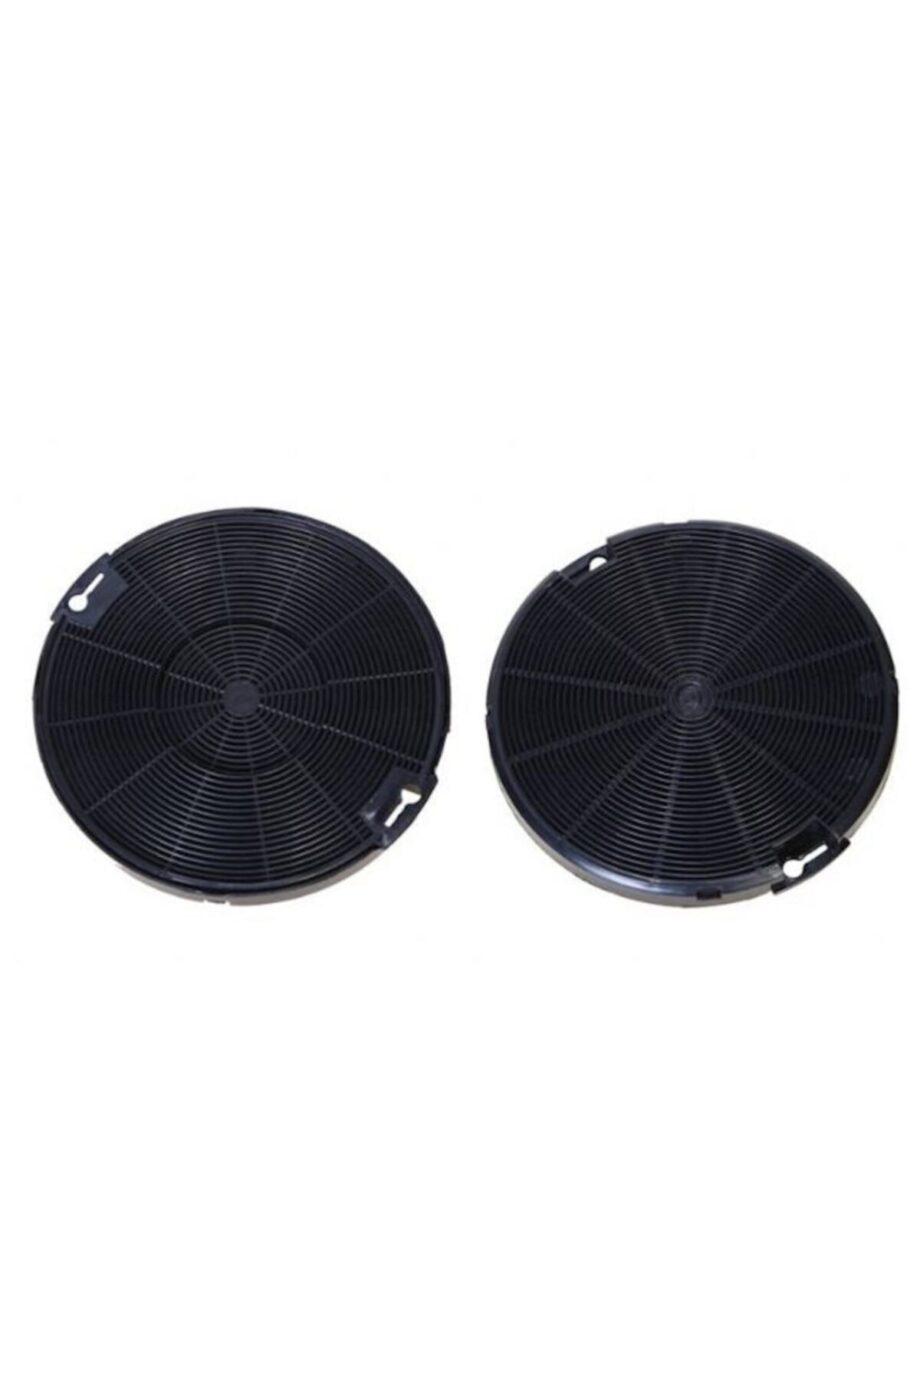 Cooker Hood Carbon Filter Dhi 645 Ftr And Dhi 642 Etr Hood Carbon Filter Range Hood Bosch OZBA SPARE PARTS STORE